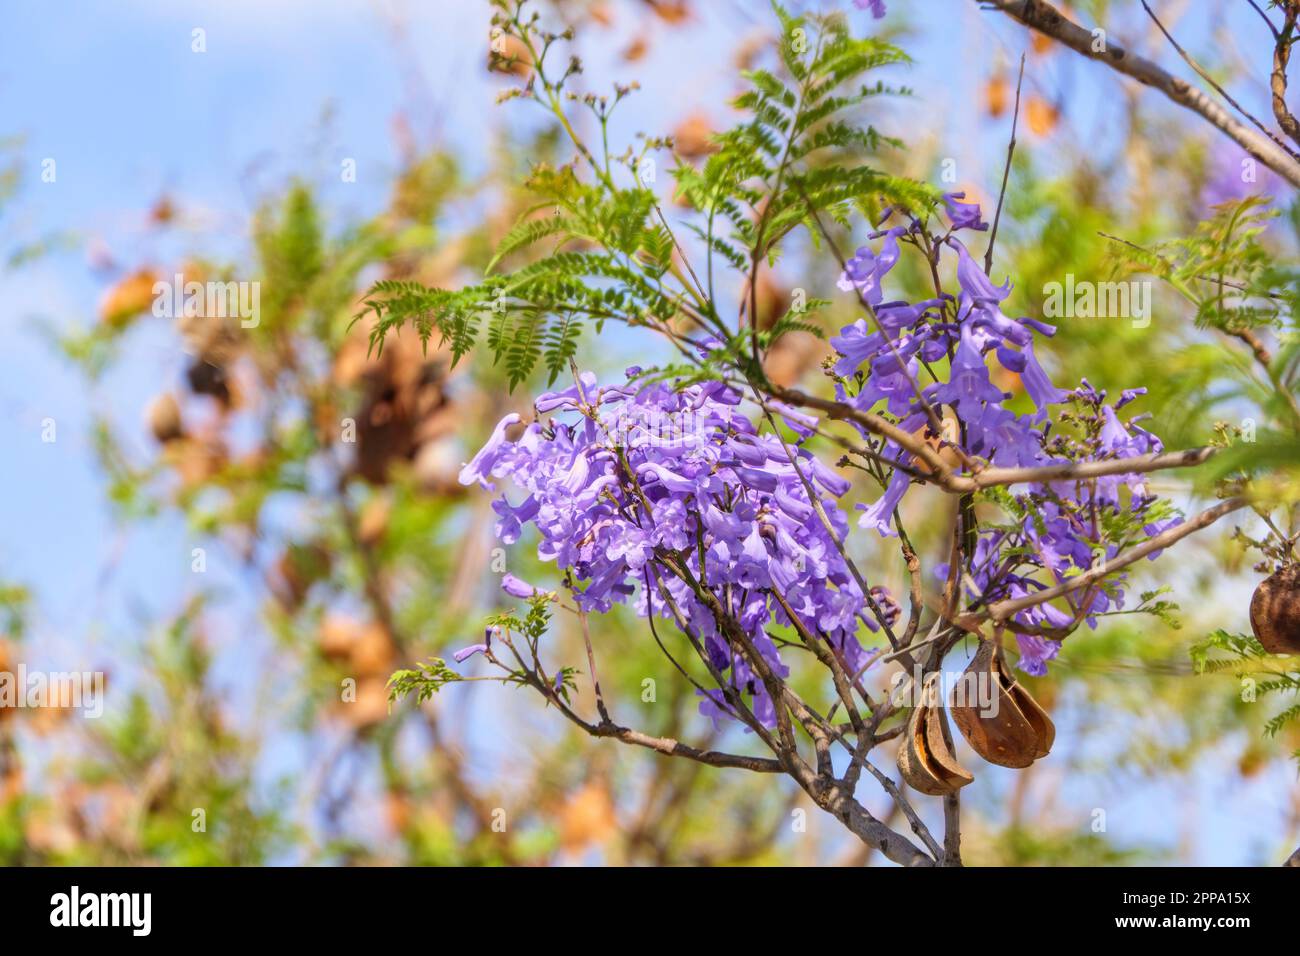 Violet flowers and seeds of the Jacaranda tree among the foliage against the blue sky. Closeup Stock Photo